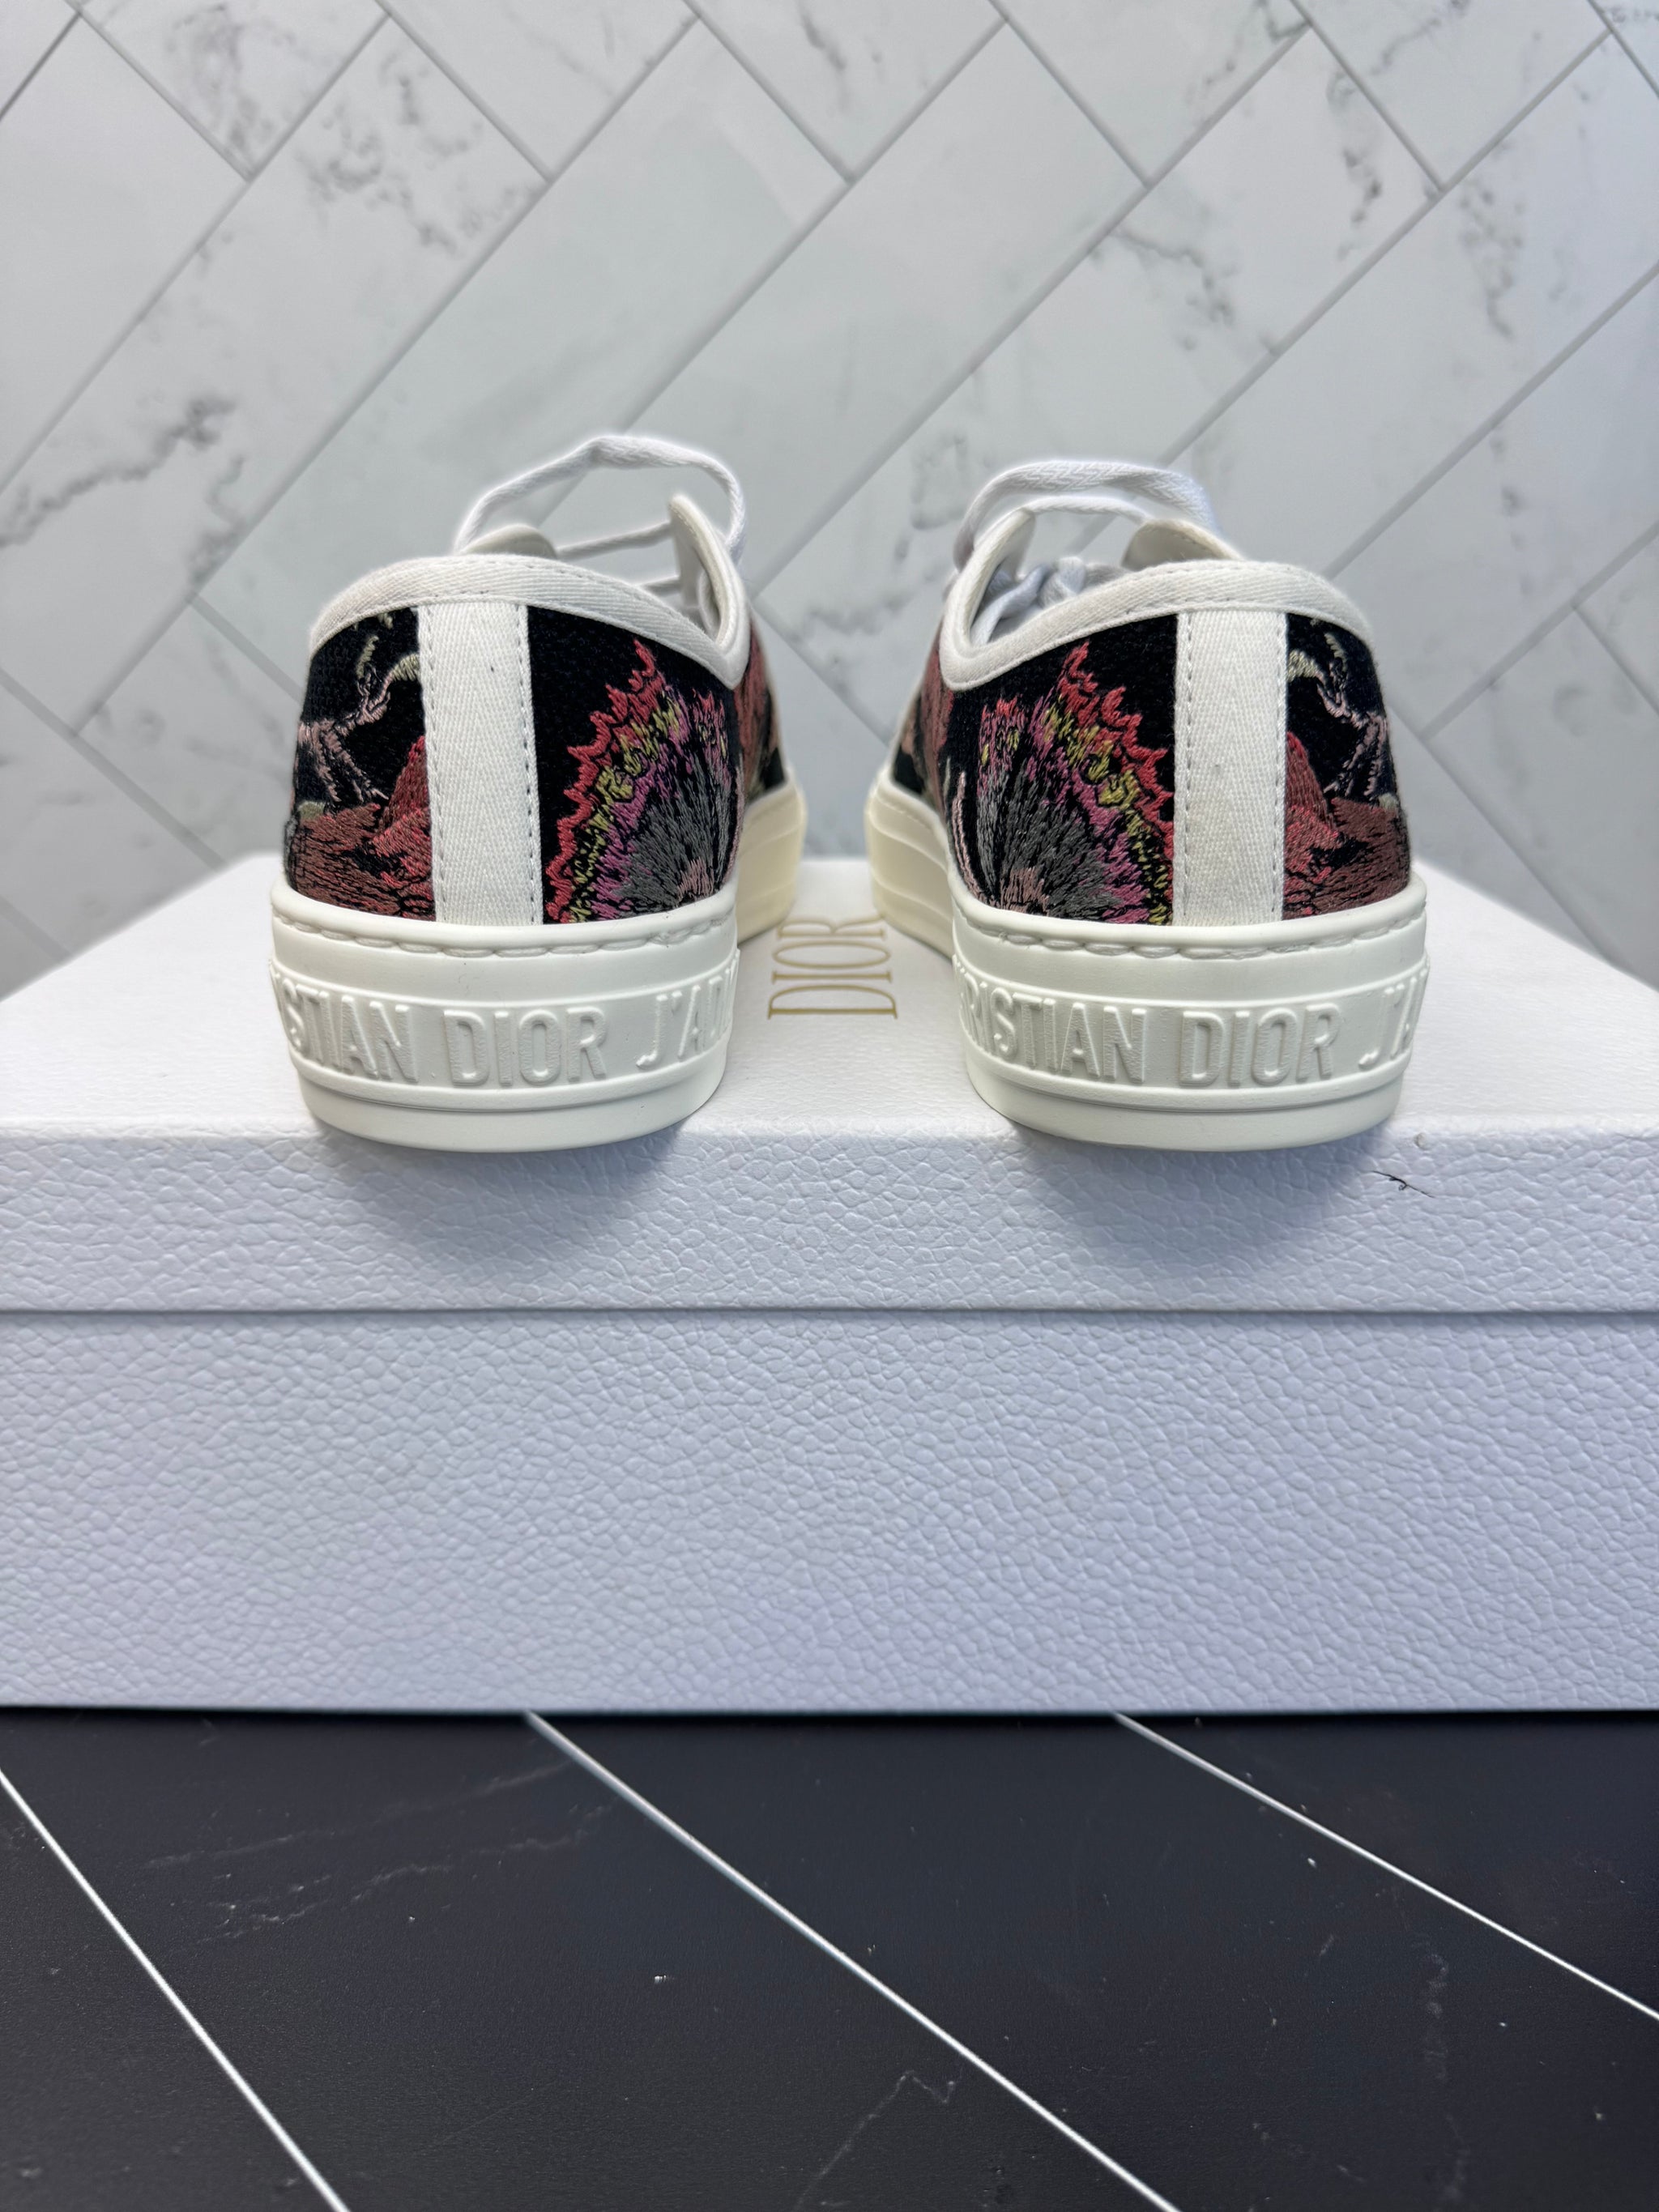 BRAND NEW- Dior Black Floral Sneakers Size 36